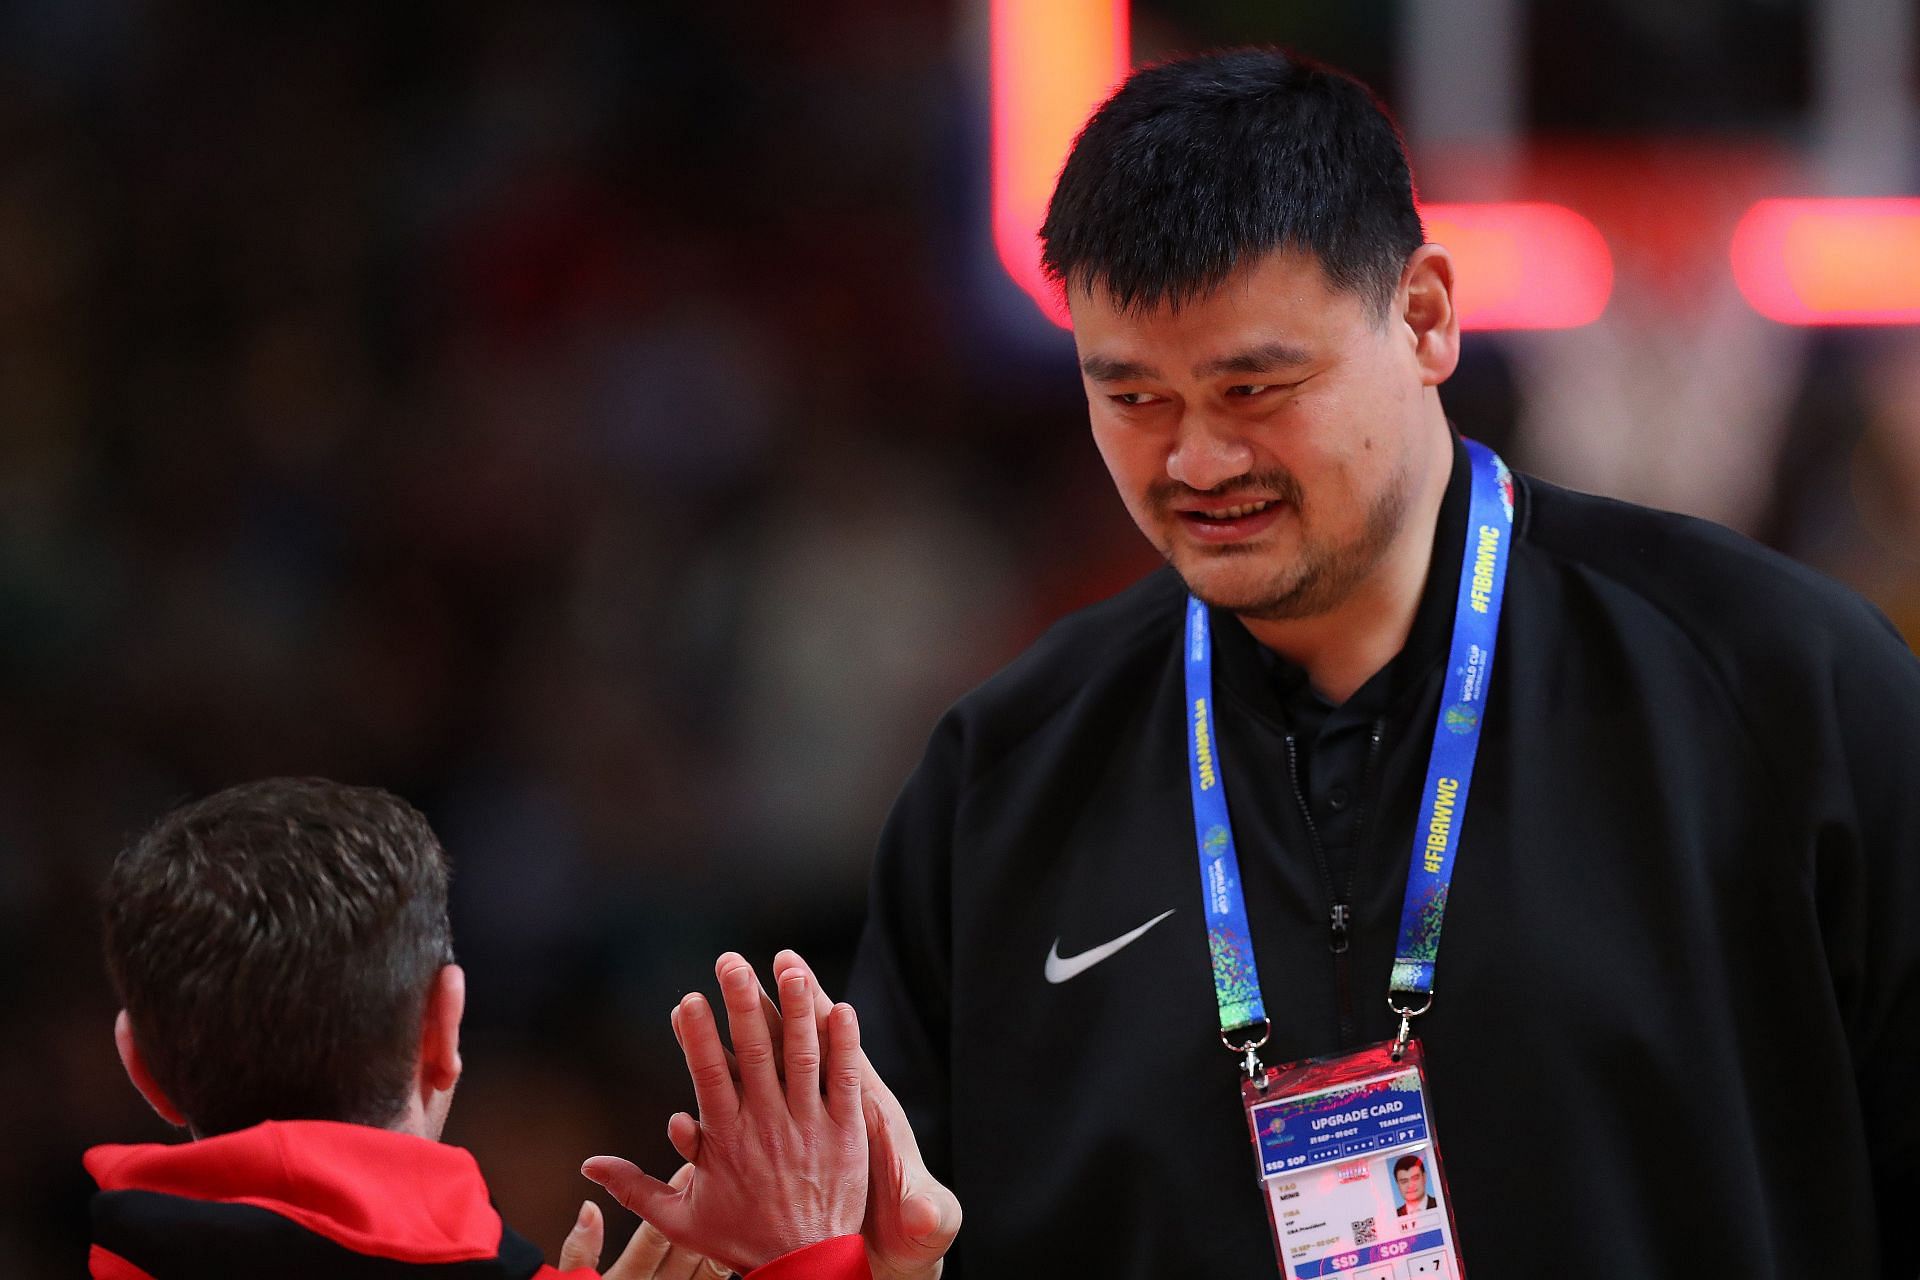 Yao Ming had a great NBA career, but did not deserve his 2011 NBA All-Star selection (Image via Getty Images)